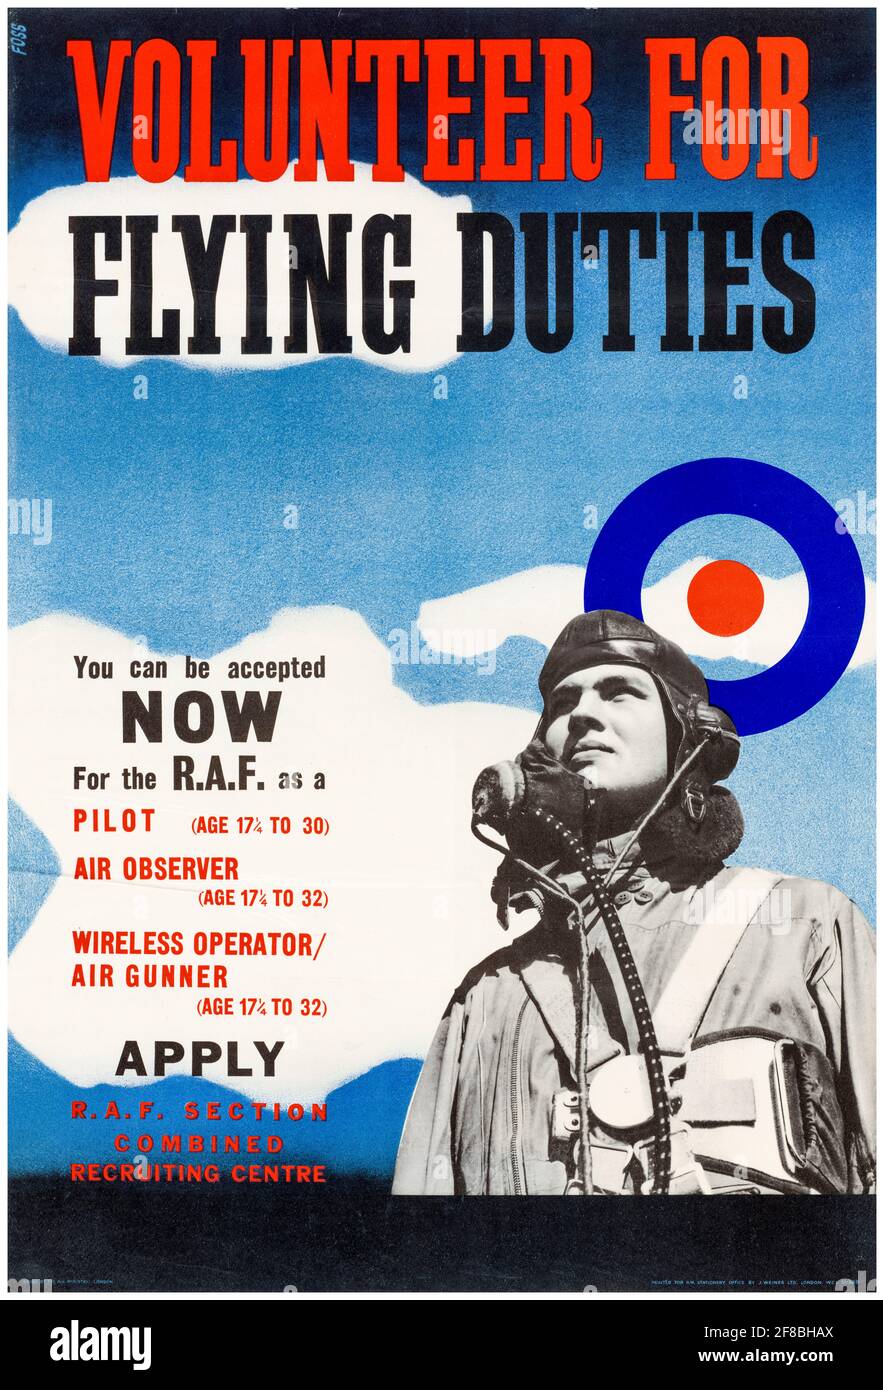 British, WW2 Royal Air Force (RAF) recruitment poster, Volunteer for Flying Duties, 1942-1945 Stock Photo